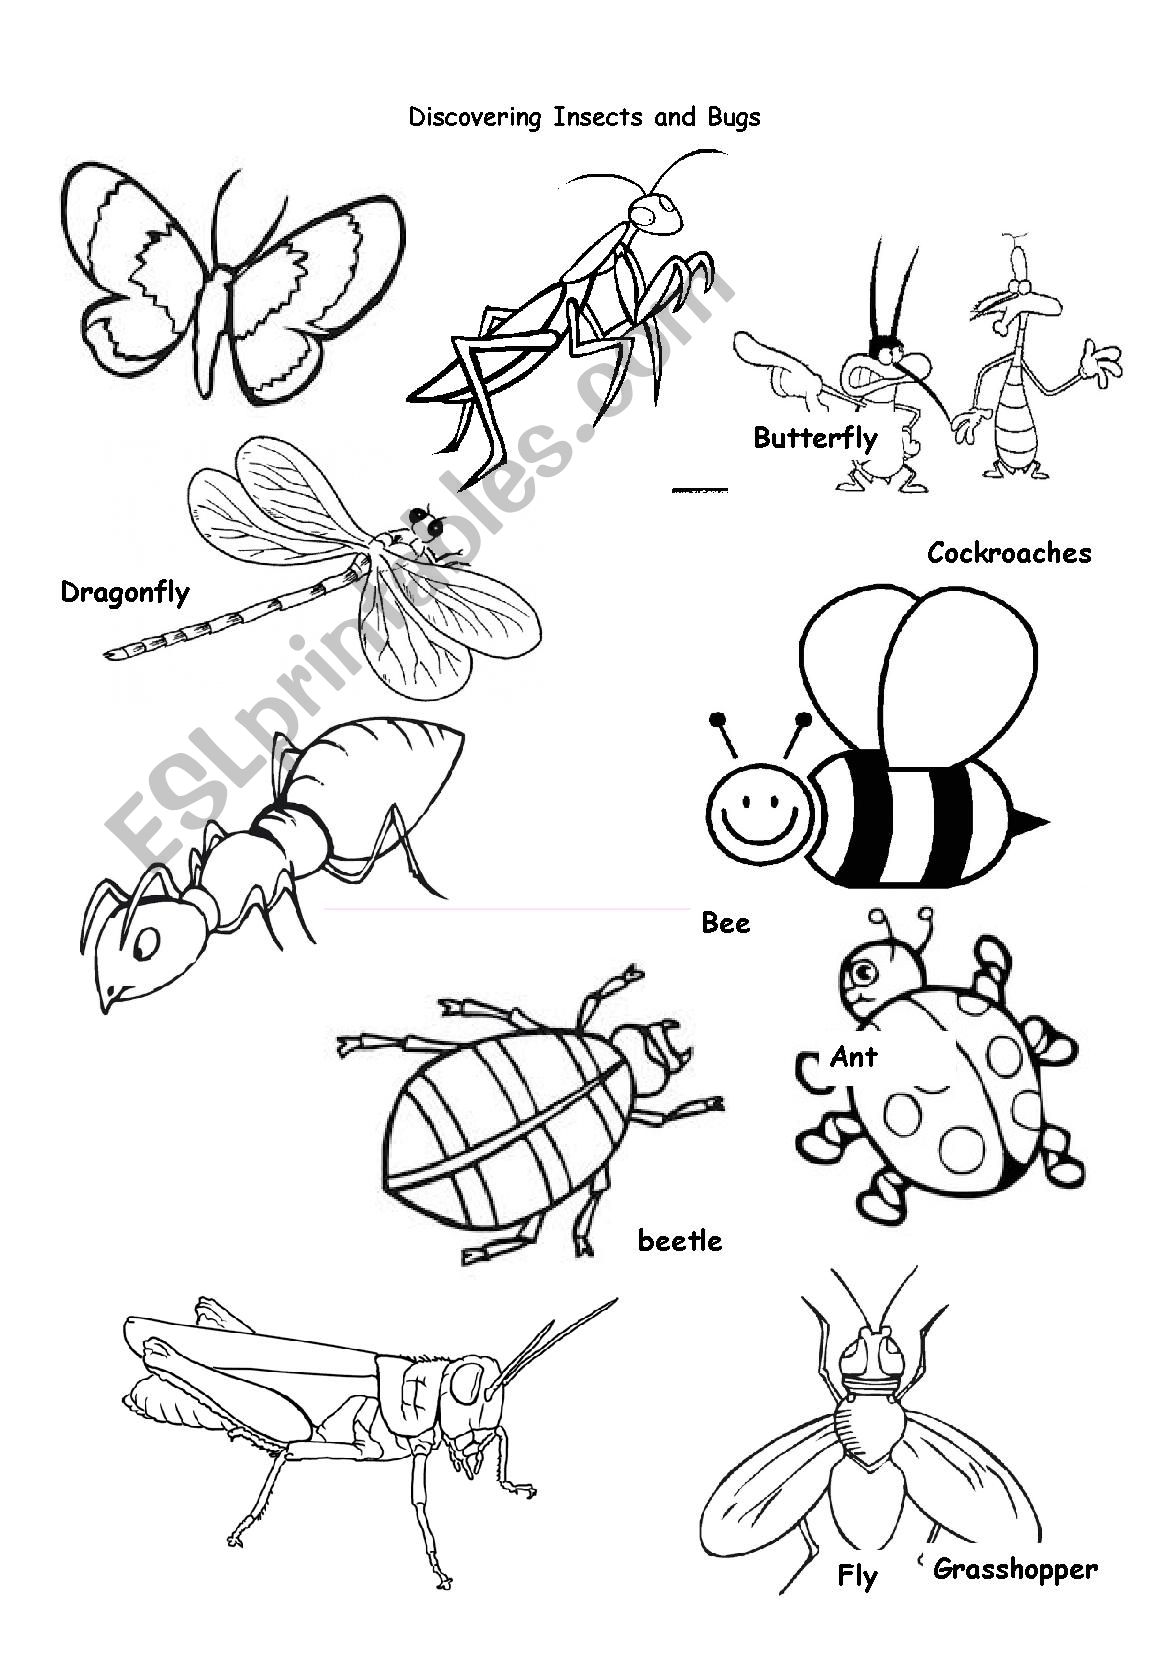 Insects and Bugs worksheet